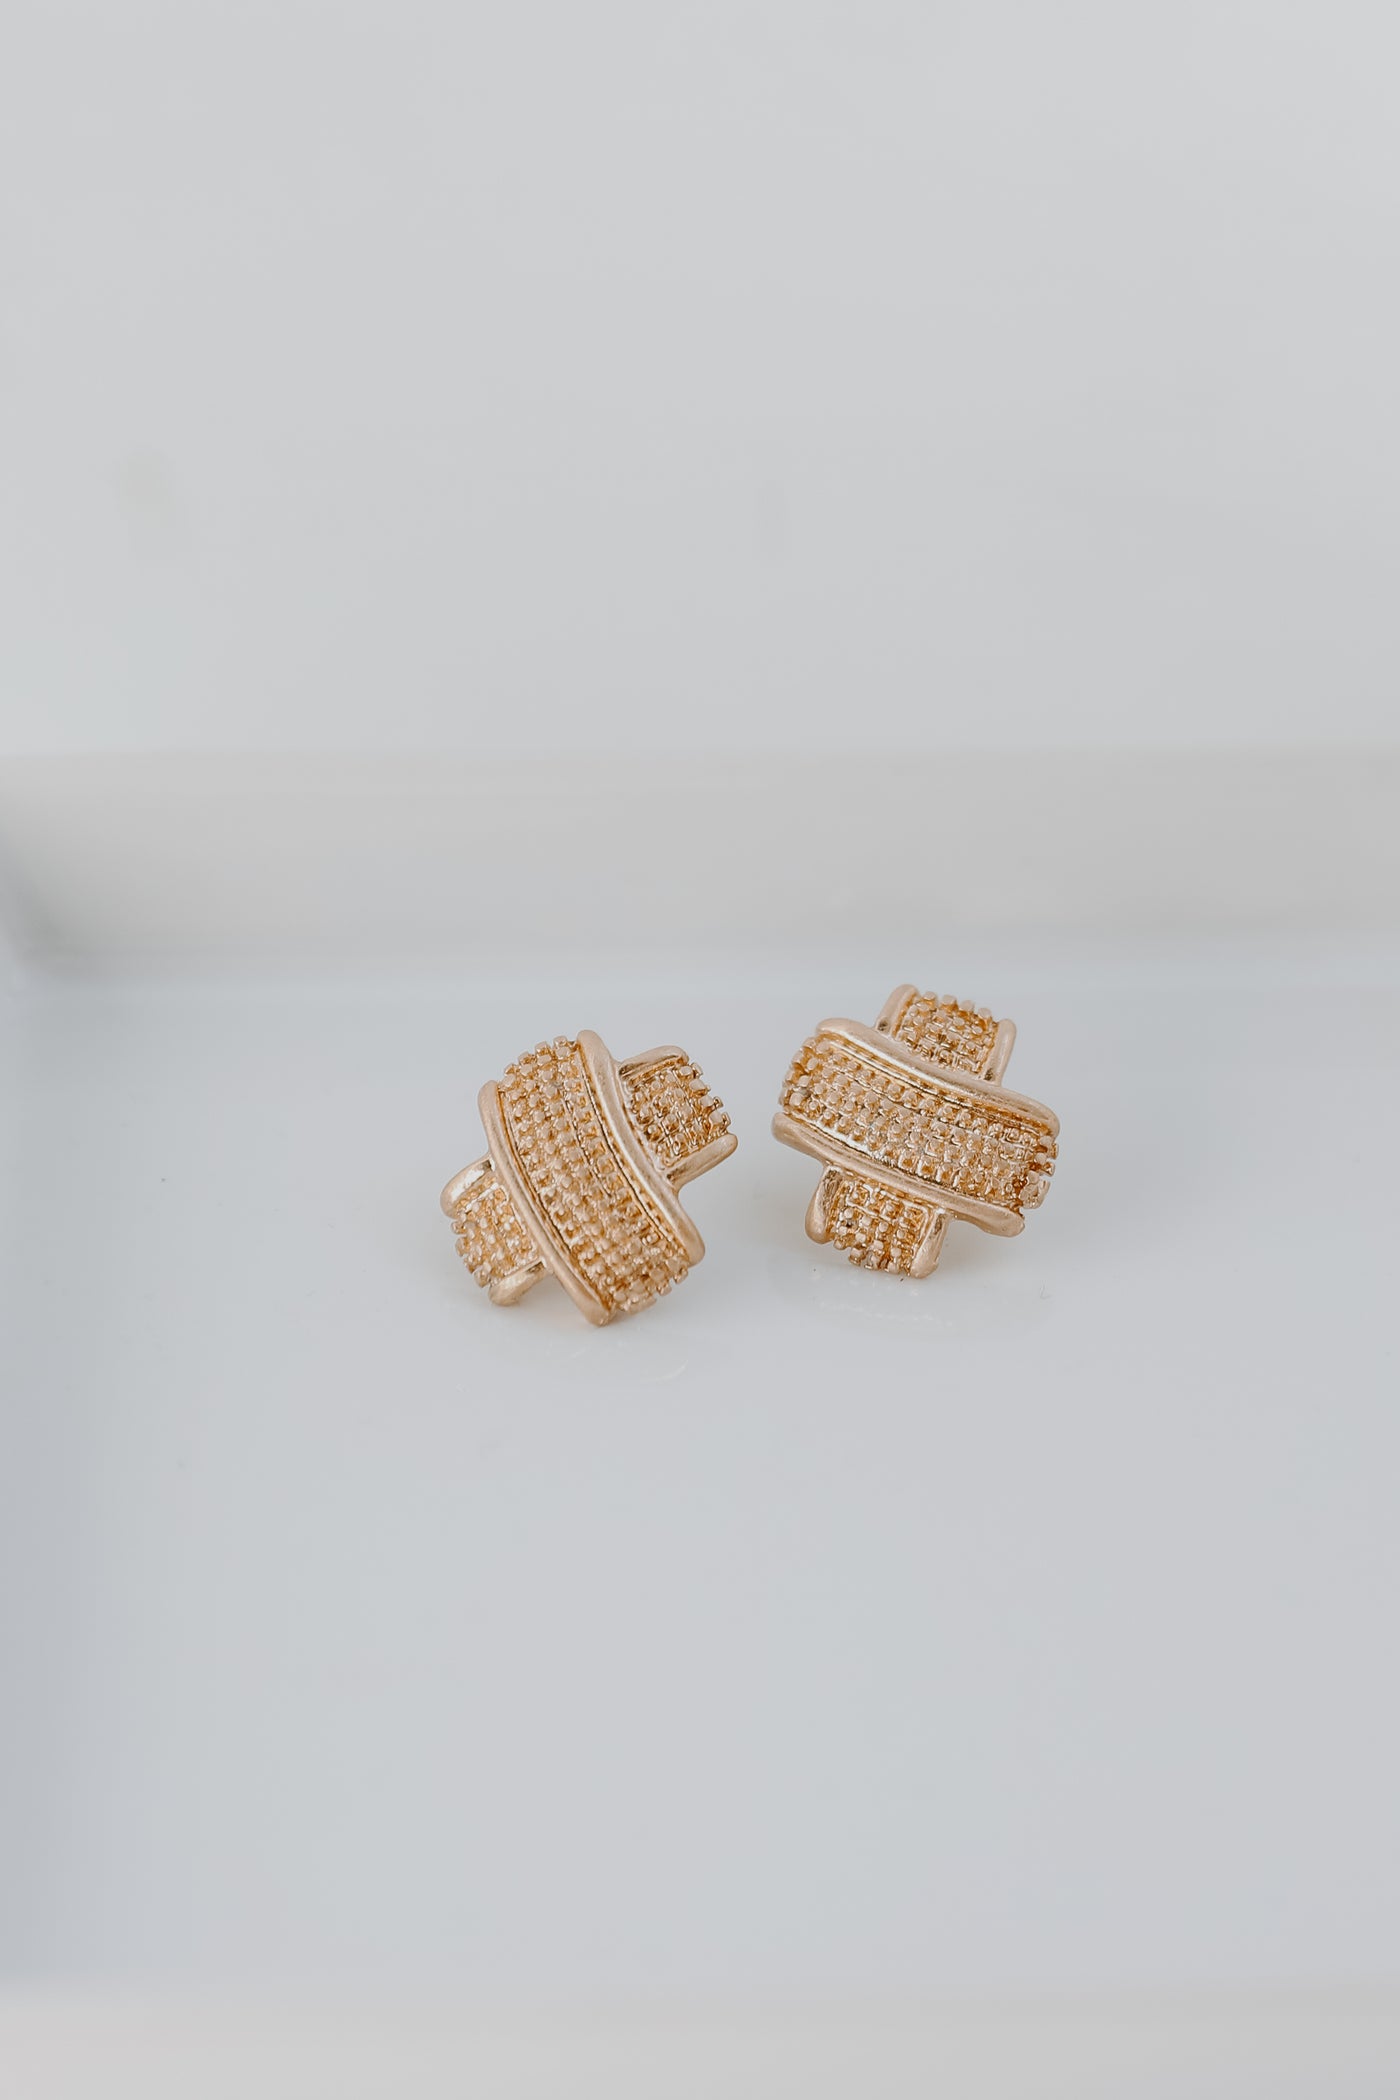 Gold Stud Earrings from dress up